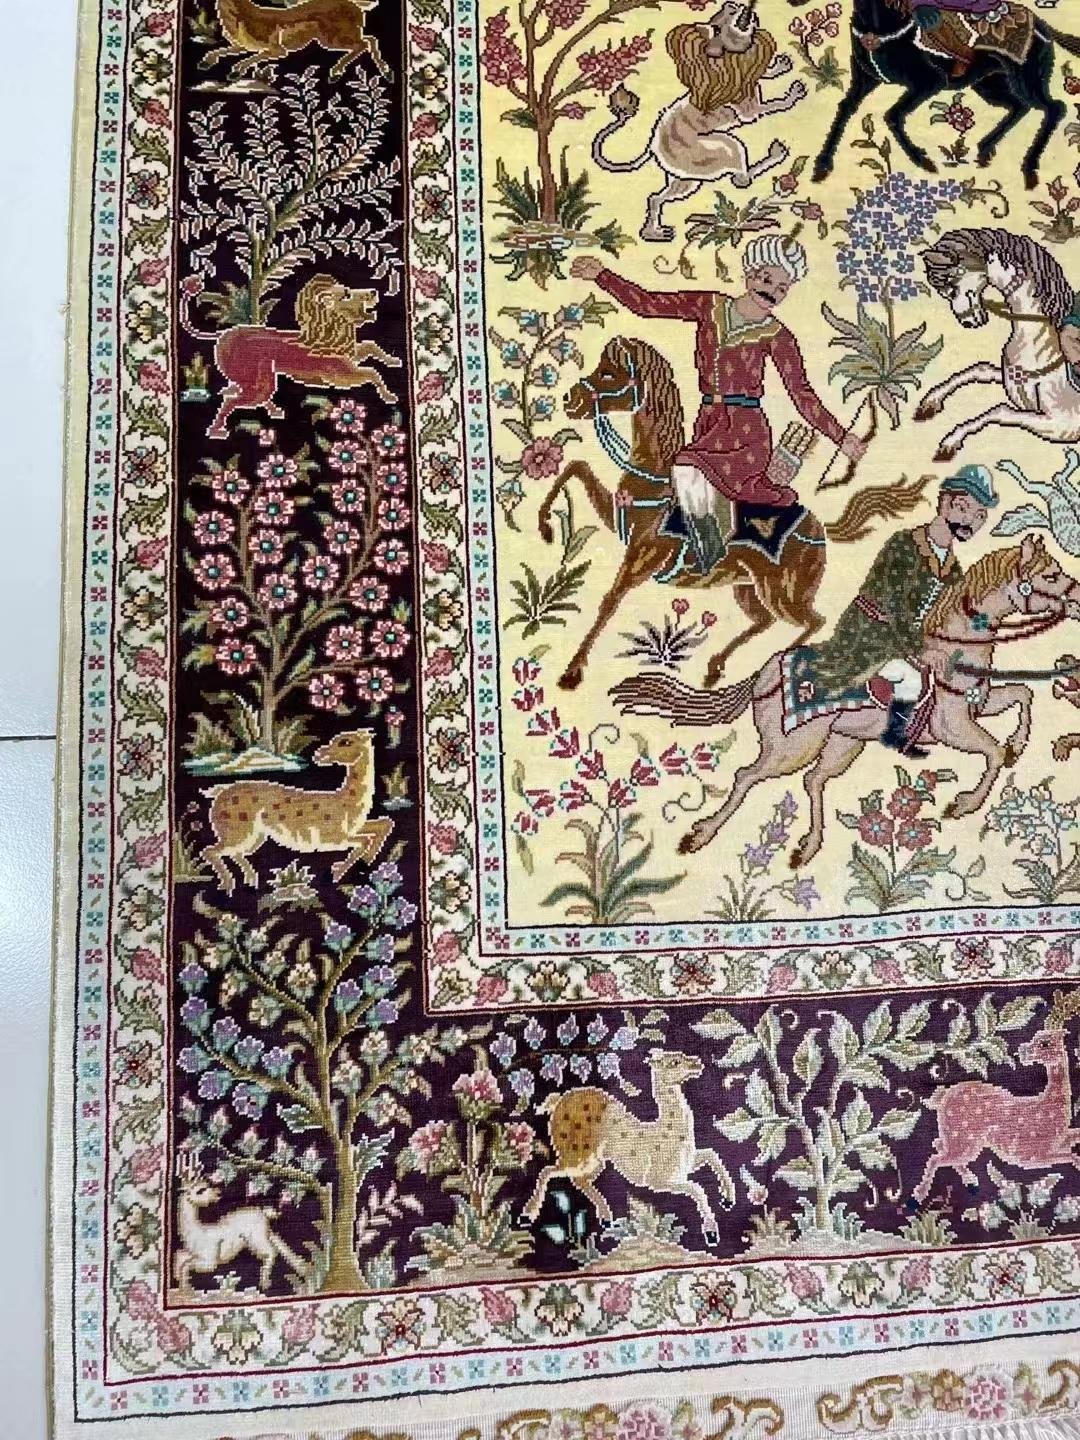 4x6ft handmade silk wall hanging tapestry hunting scene collection rug 4